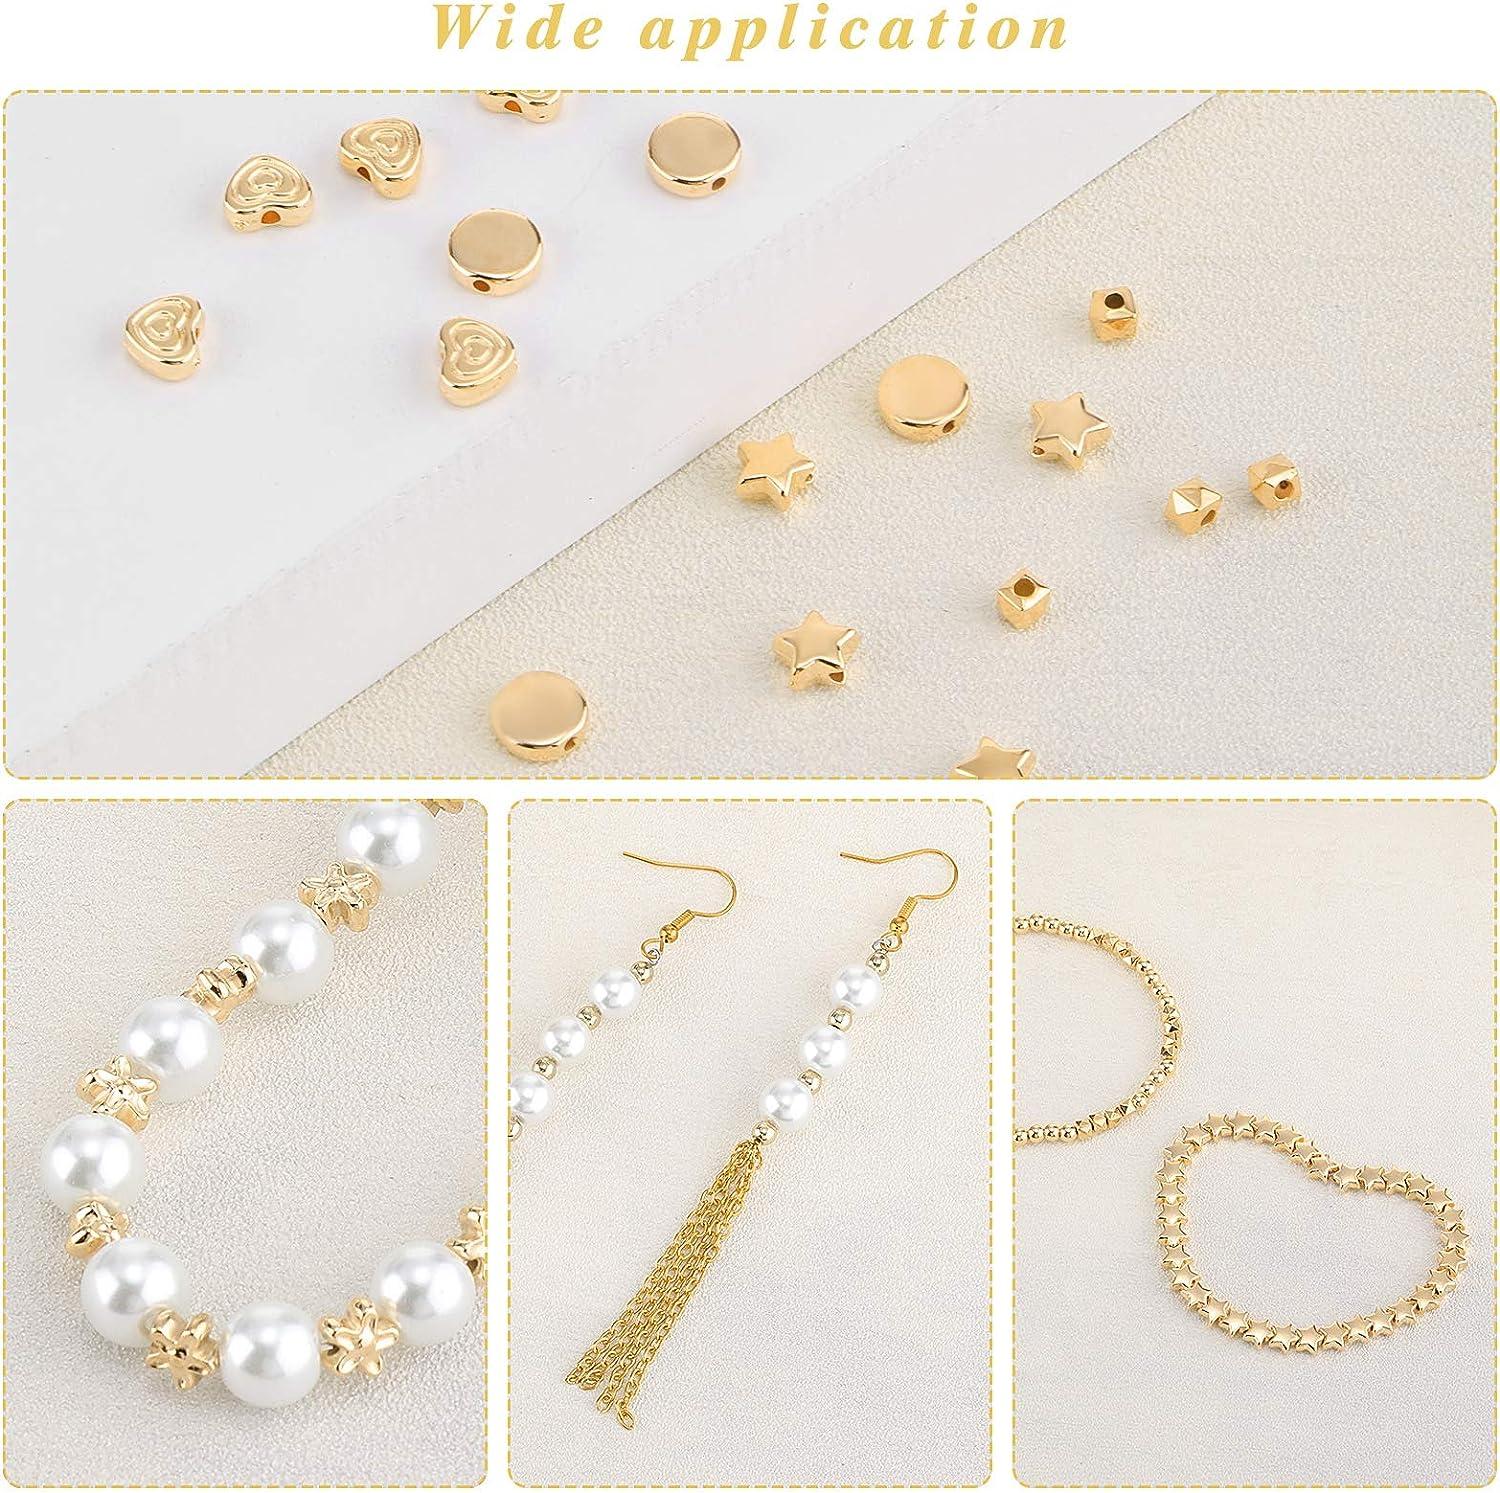 Flat Round Spacer Beads, Gold Filled Gear Shaped Spacer Bead for